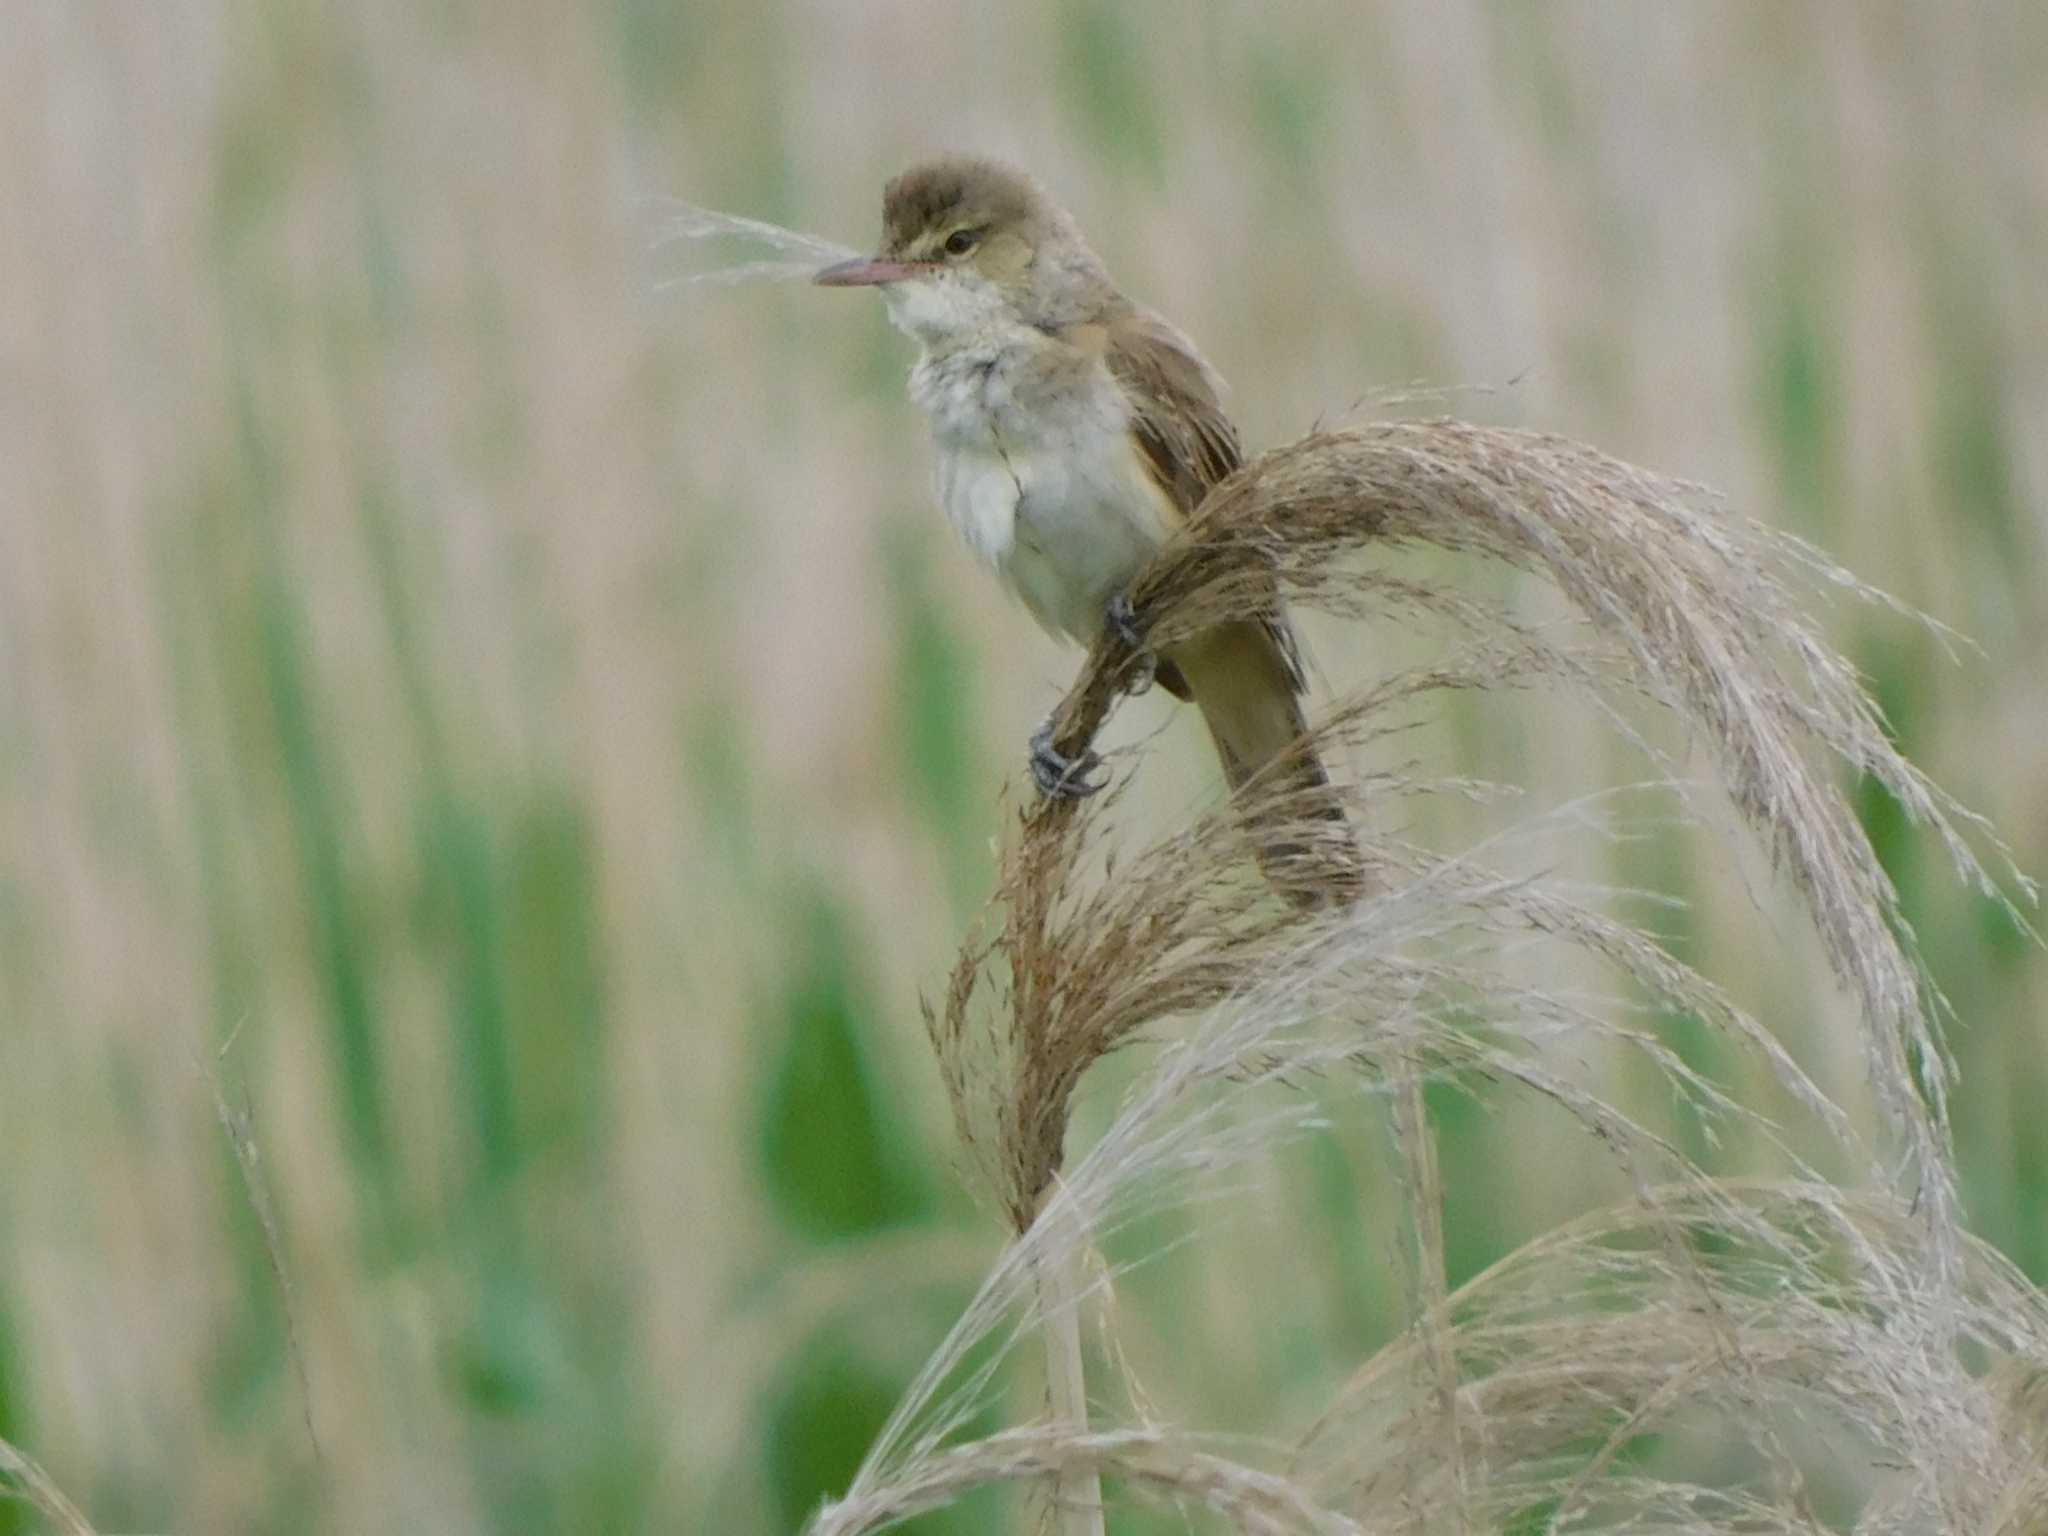 Photo of Oriental Reed Warbler at さいたま市 by ななほしてんとうむし